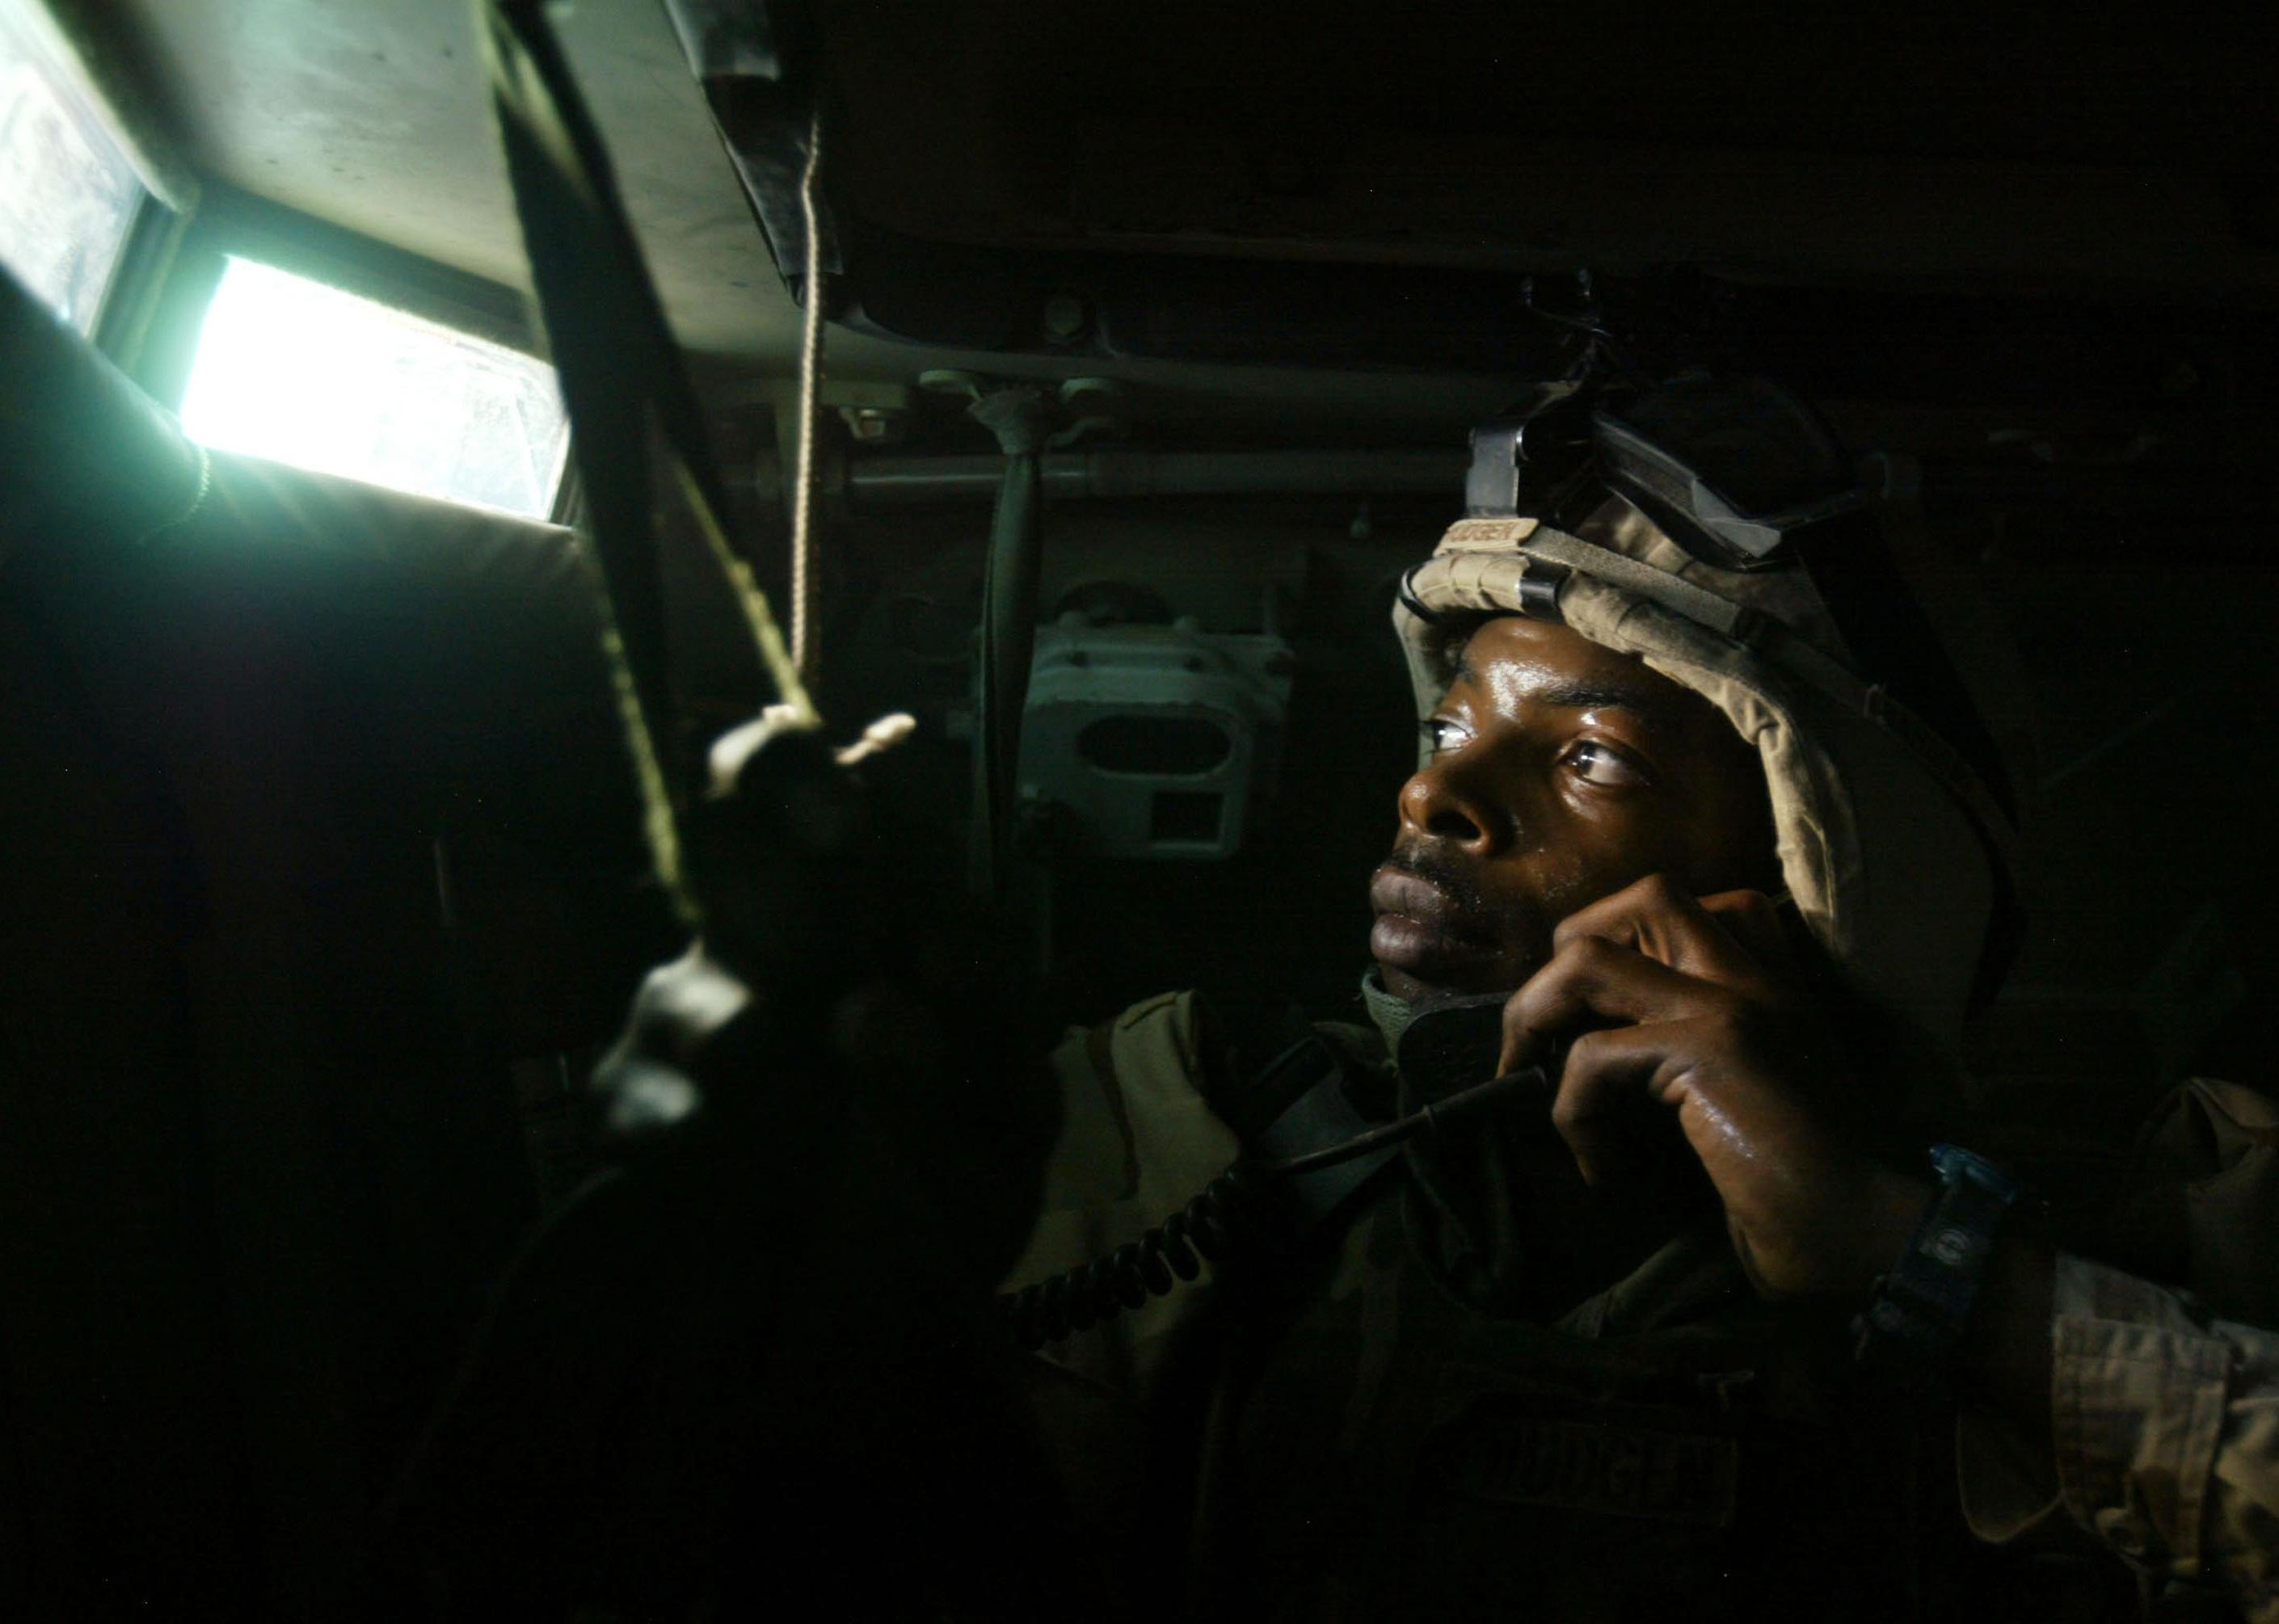 An American Army Sergeant looking out the window of a Bradley fighting vehicle in Najaf, Iraq.